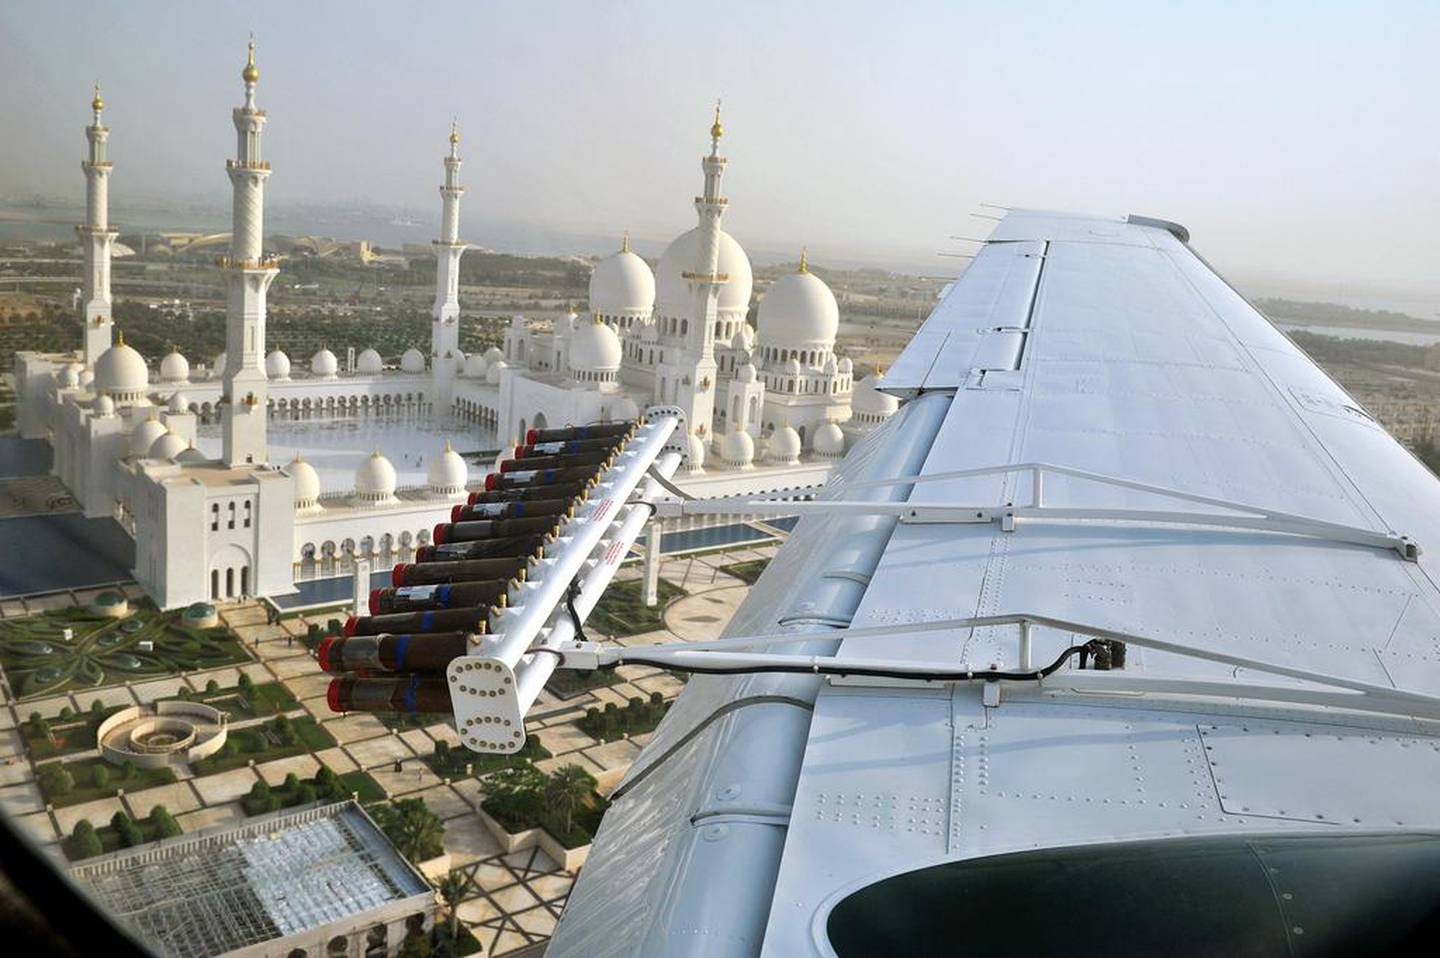 A cloud-seeding plane flies near the Sheikh Zayed Grand Mosque in Abu Dhabi. Courtesy: National Centre for Meteorology and Seismology